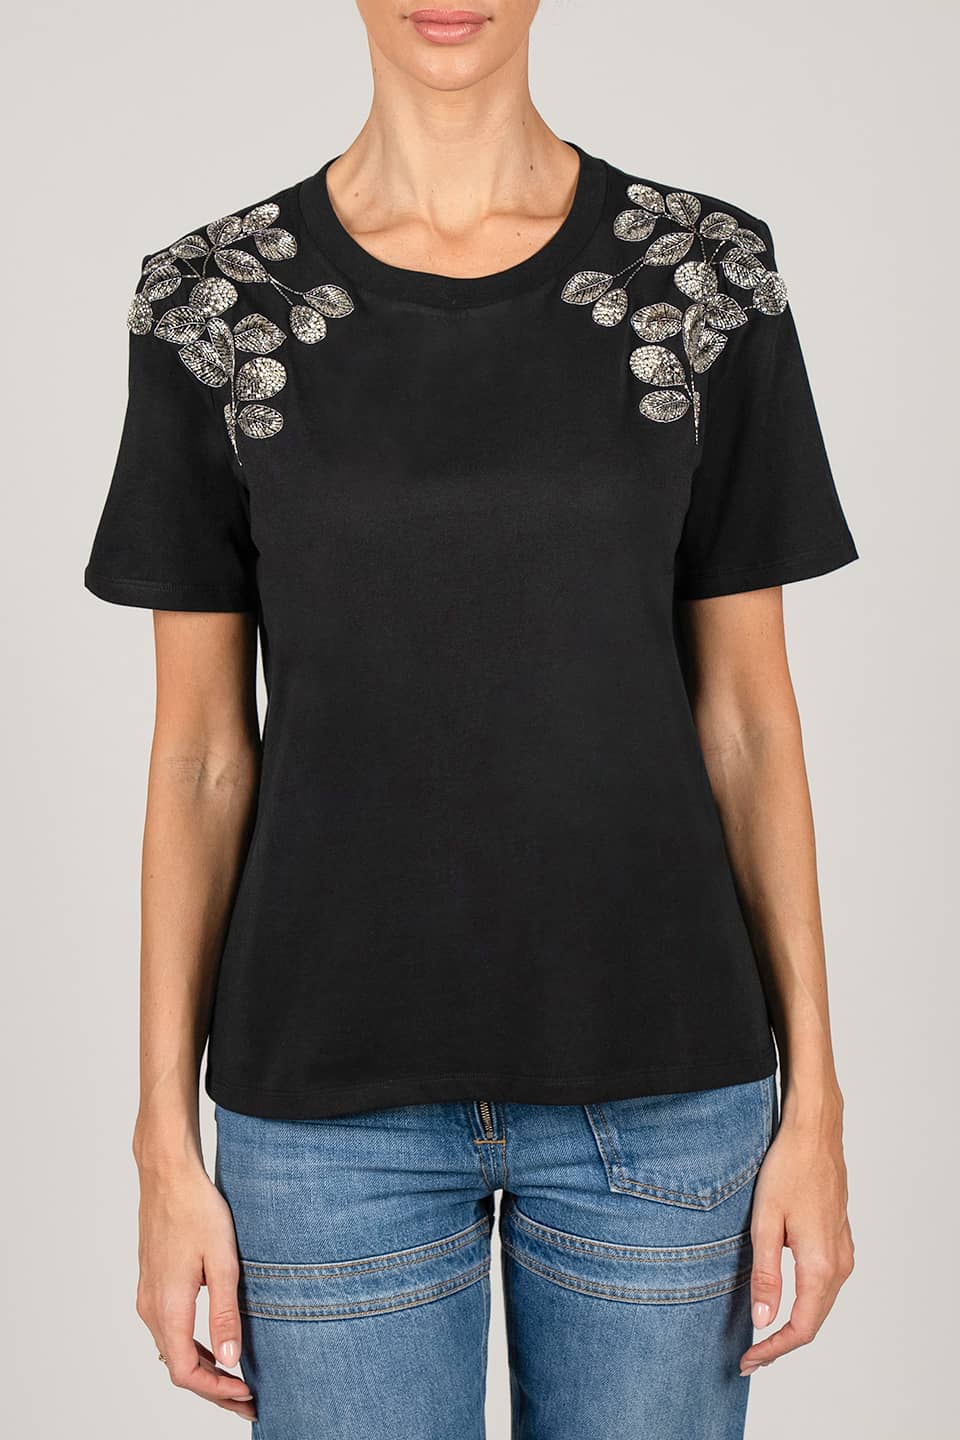 Shop online trendy Black T-shirt from Dodo Bar Or Fashion designer. Product gallery 1